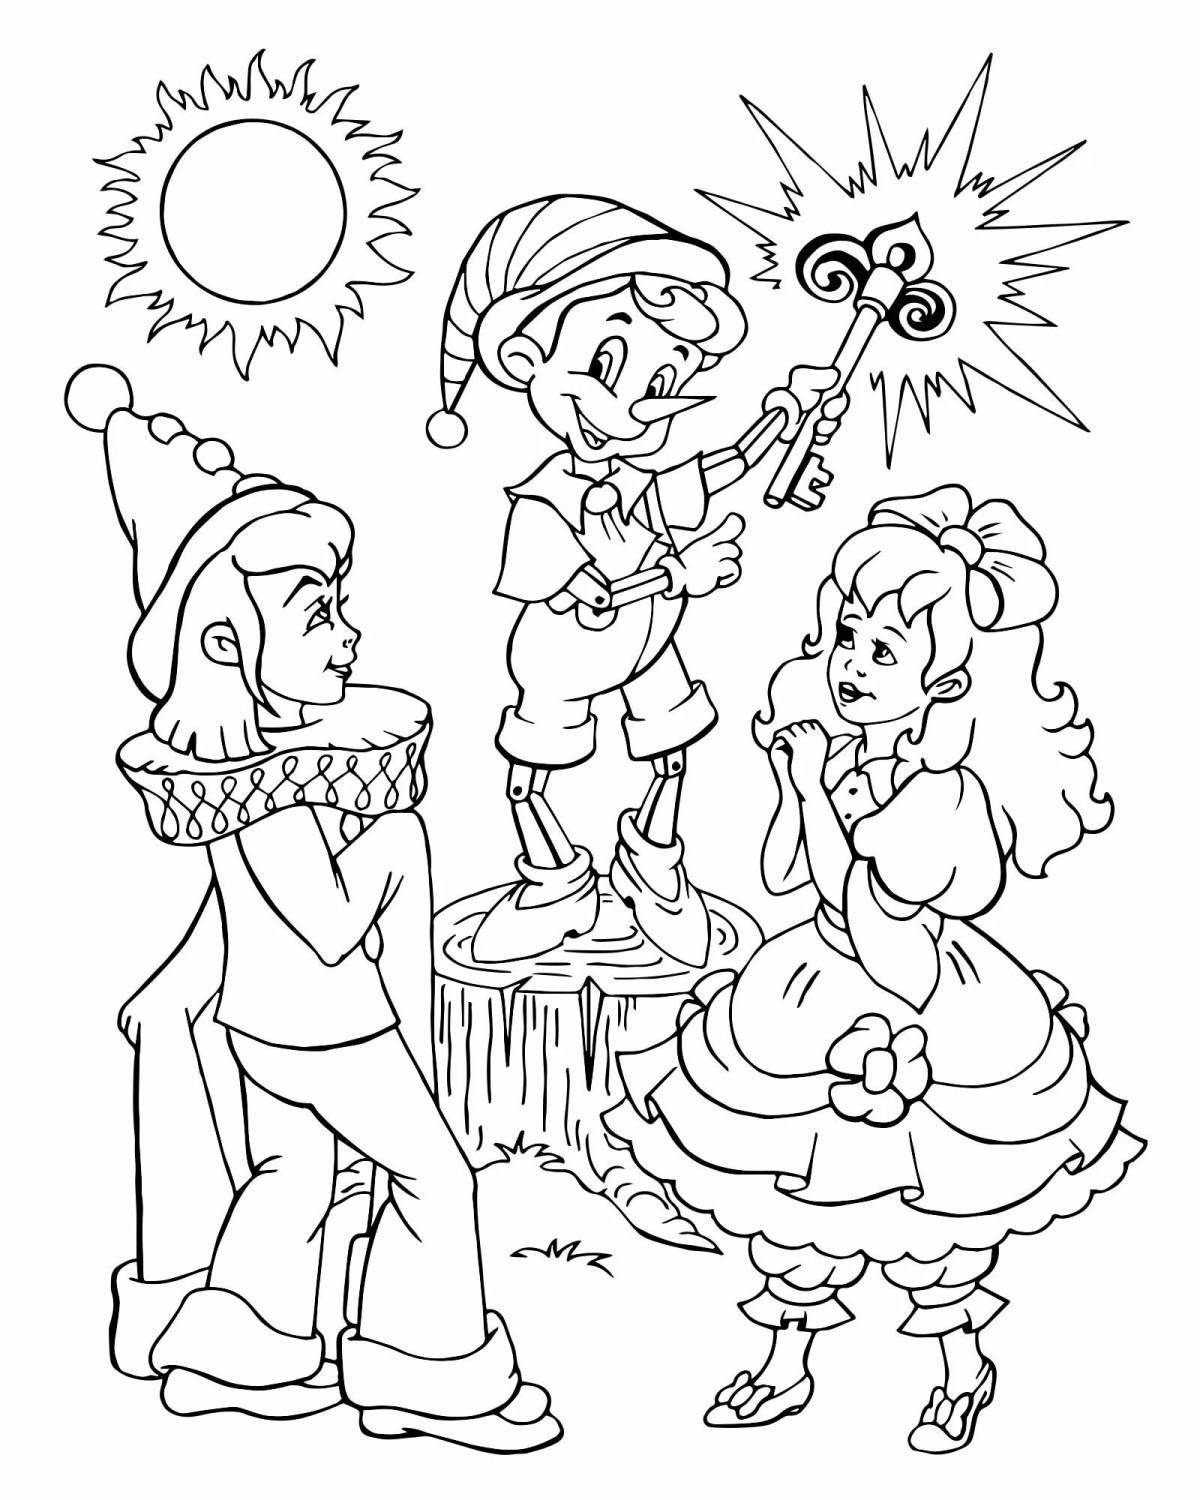 Colorful golden key coloring page